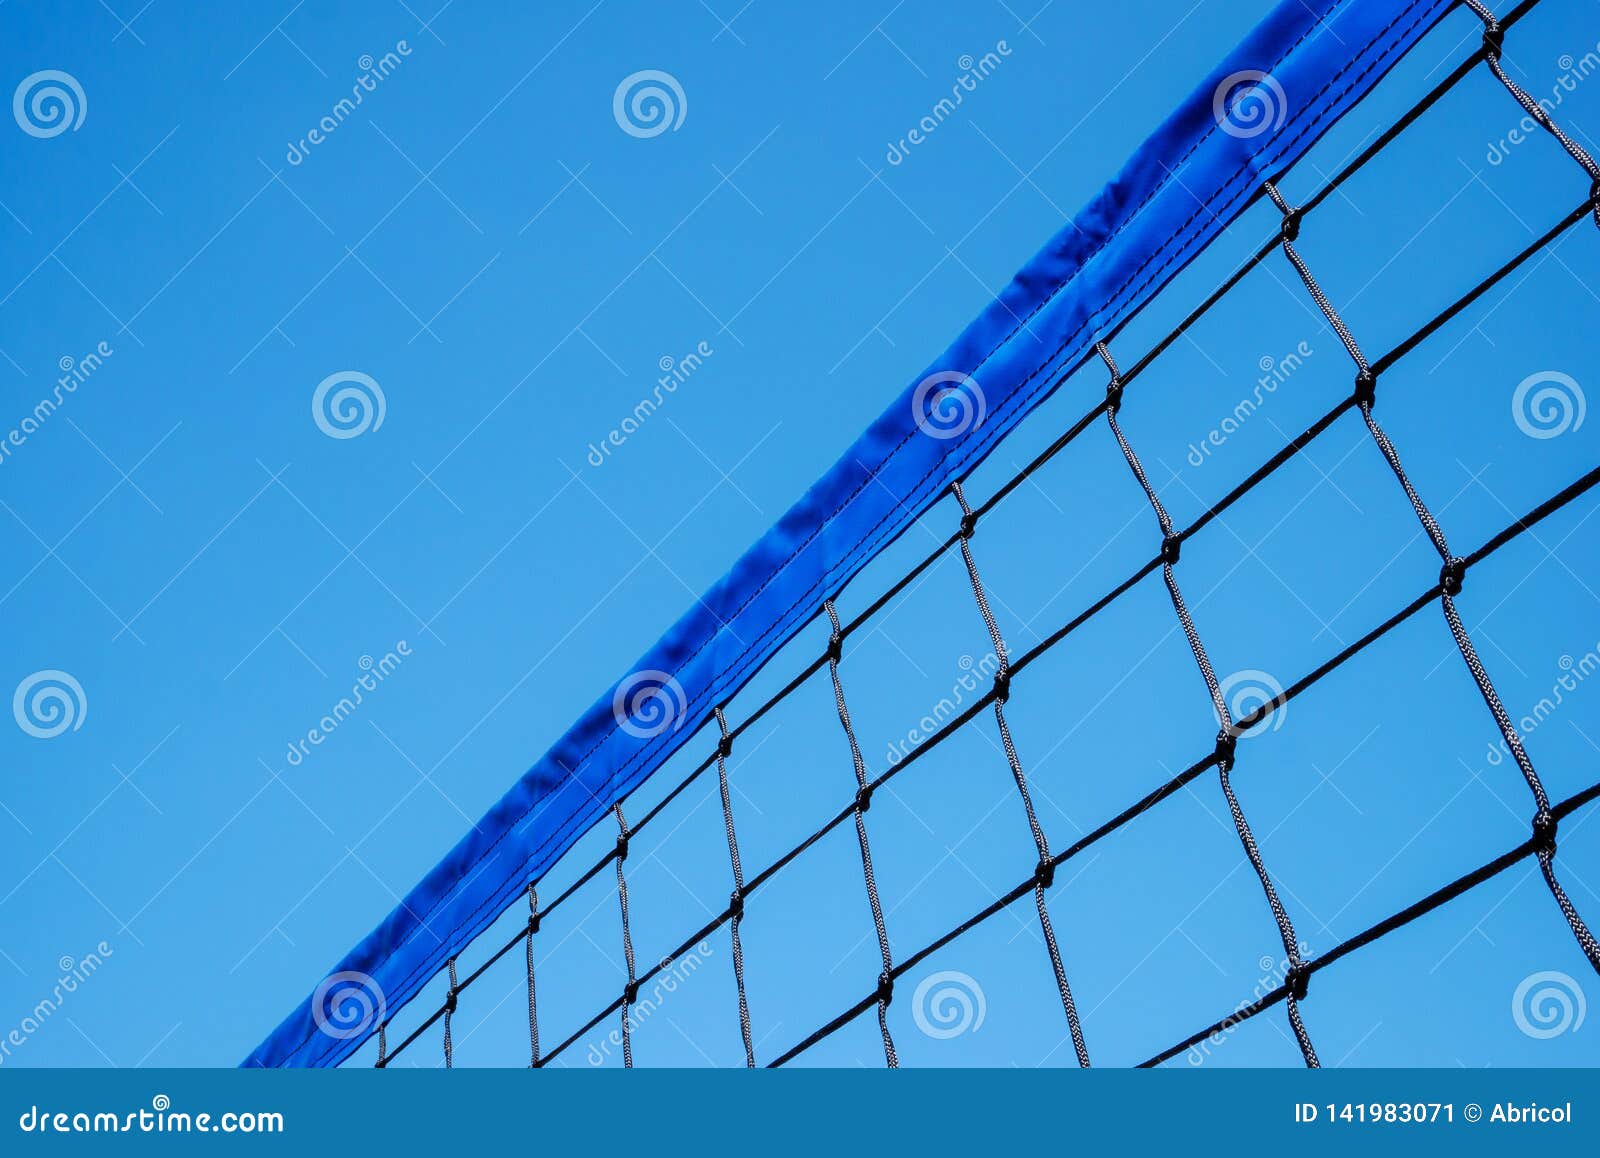 Close Up of Volleyball Net Against Clear Blue Sky Stock Image - Image ...